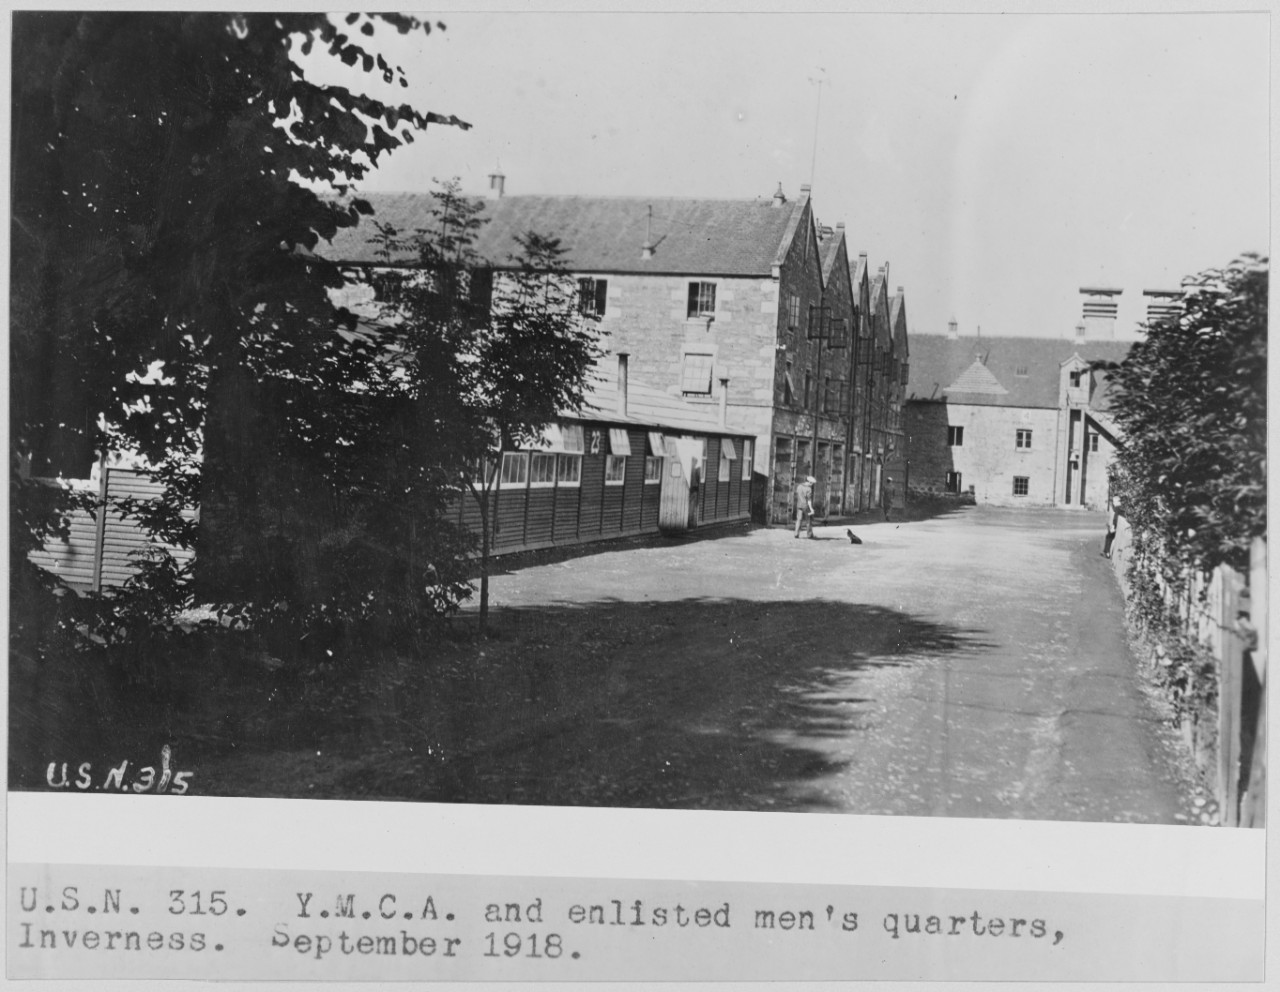 U. S. N. 315. Y. M. C. A. and enlisted men's quarters, Inverness